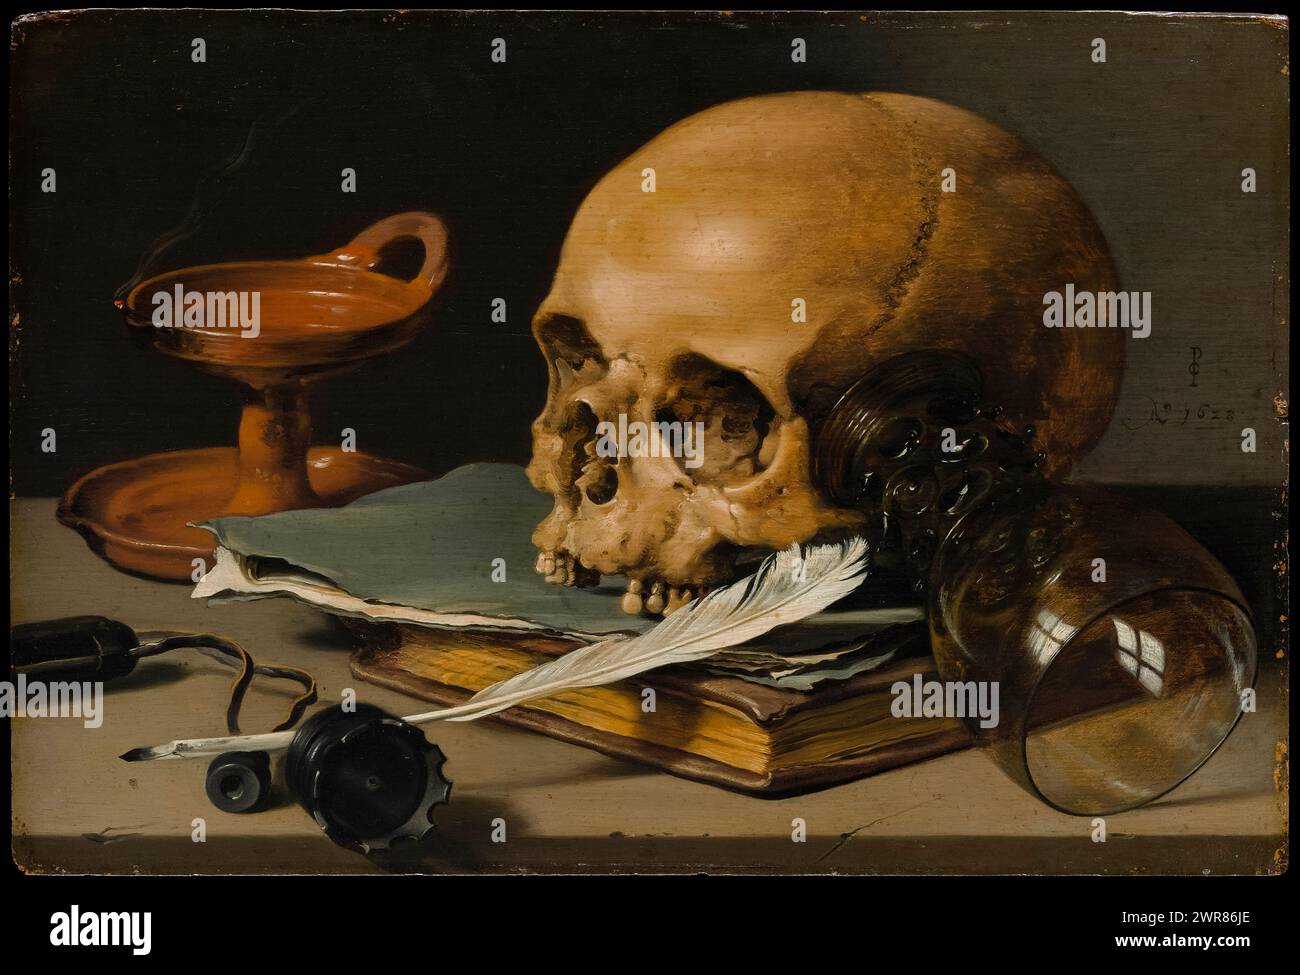 Still Life with a Skull and a Writing Quill by Dutch artist Pieter Claesz (c.1596-1660) painted in 1628. A selection of objects symbolising mortality with expert composition and rendering of light, shadow and texture. Oil on wood. Credit: The Metropolitan Museum of Art / Universal Art Archive Stock Photo